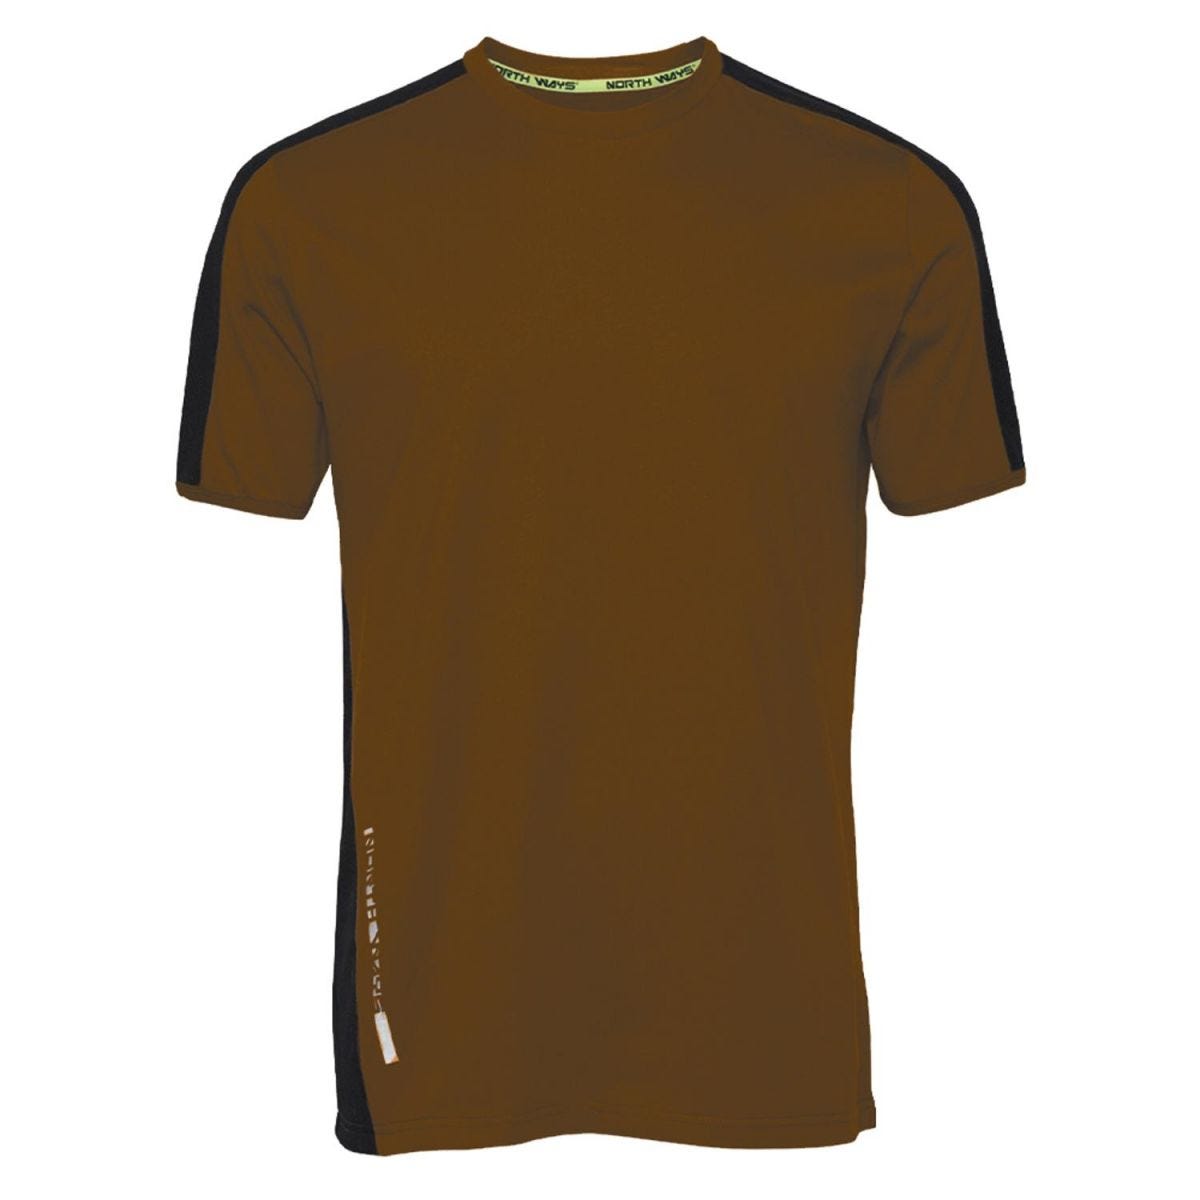 Tee-shirt à manches courtes pour homme Andy camel - North Ways - Taille 3XL 0